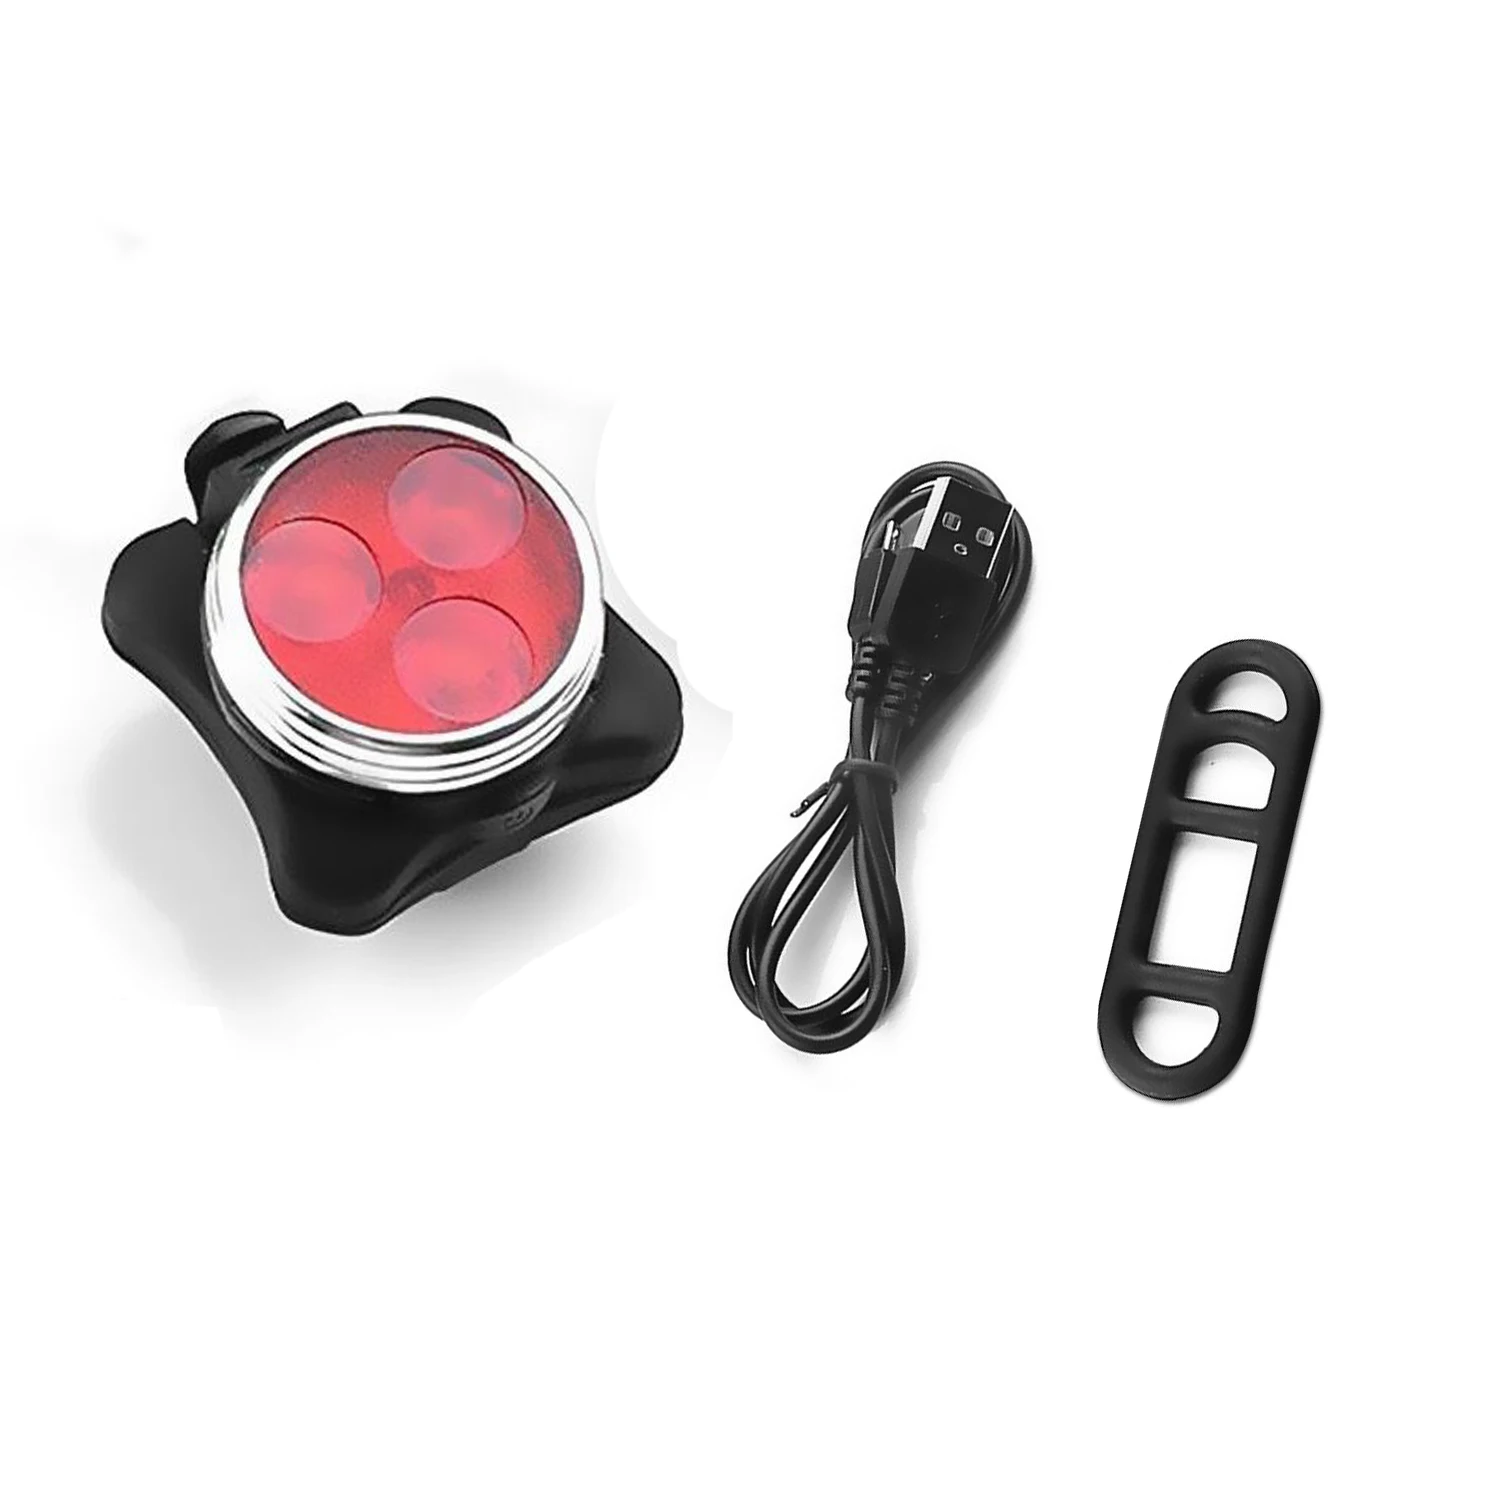 Perfect USB charging Bicycle Lights Waterproof Cycling White Front Light Red Rear Light Perfect for Mountain Helmet Head Lamp led bike 9